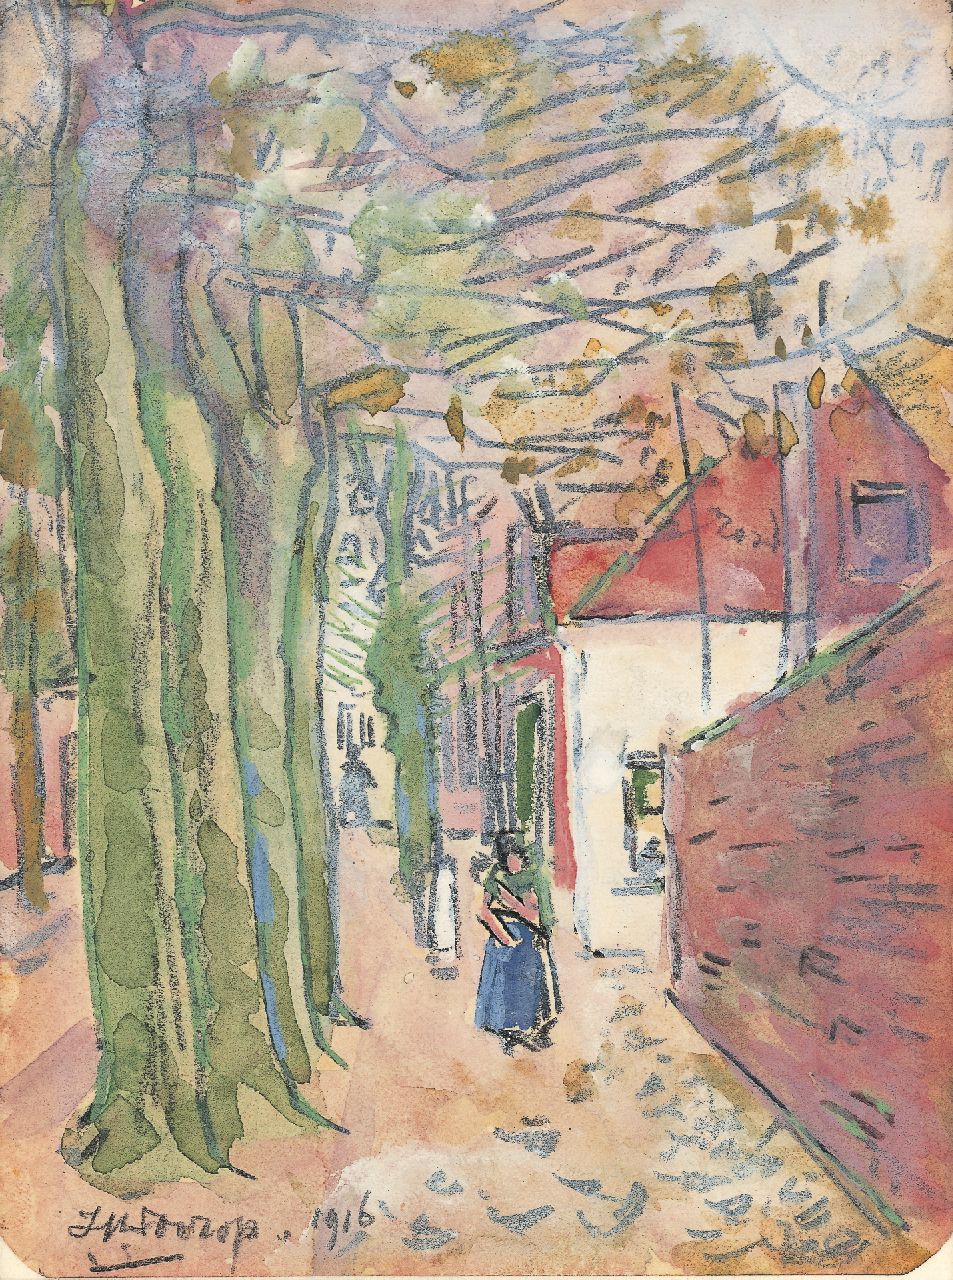 Toorop J.Th.  | Johannes Theodorus 'Jan' Toorop, The Noordstraat, Domburg, black chalk and watercolour on paper 15.8 x 11.3 cm, signed l.l. and dated 1916